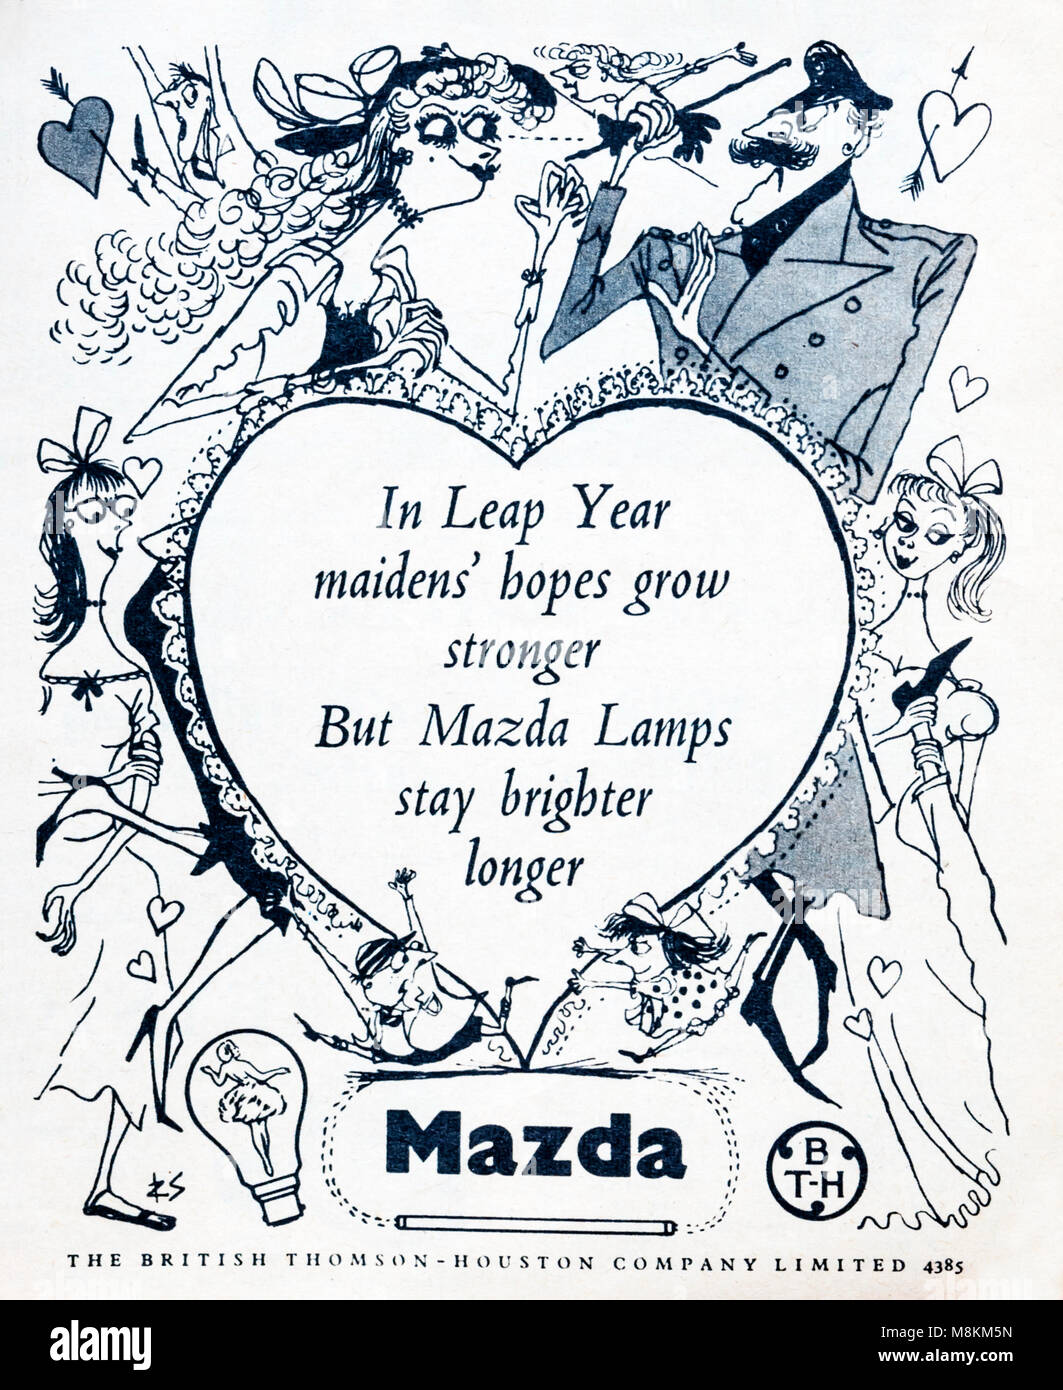 1950s advertisement advertising Mazda light bulbs.  Illustrated by Ronald Searle. Stock Photo